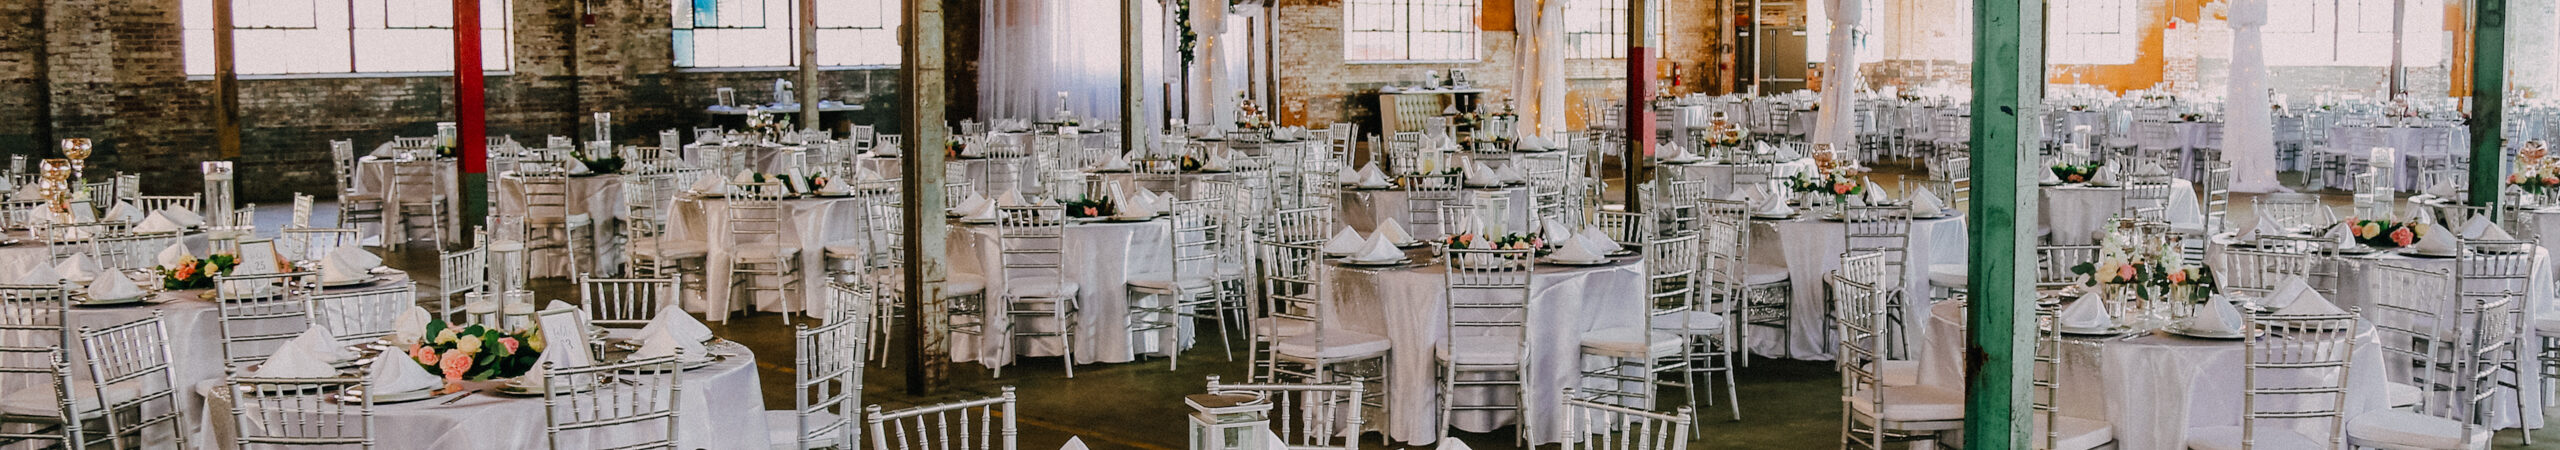 The Glass Factory Wedding